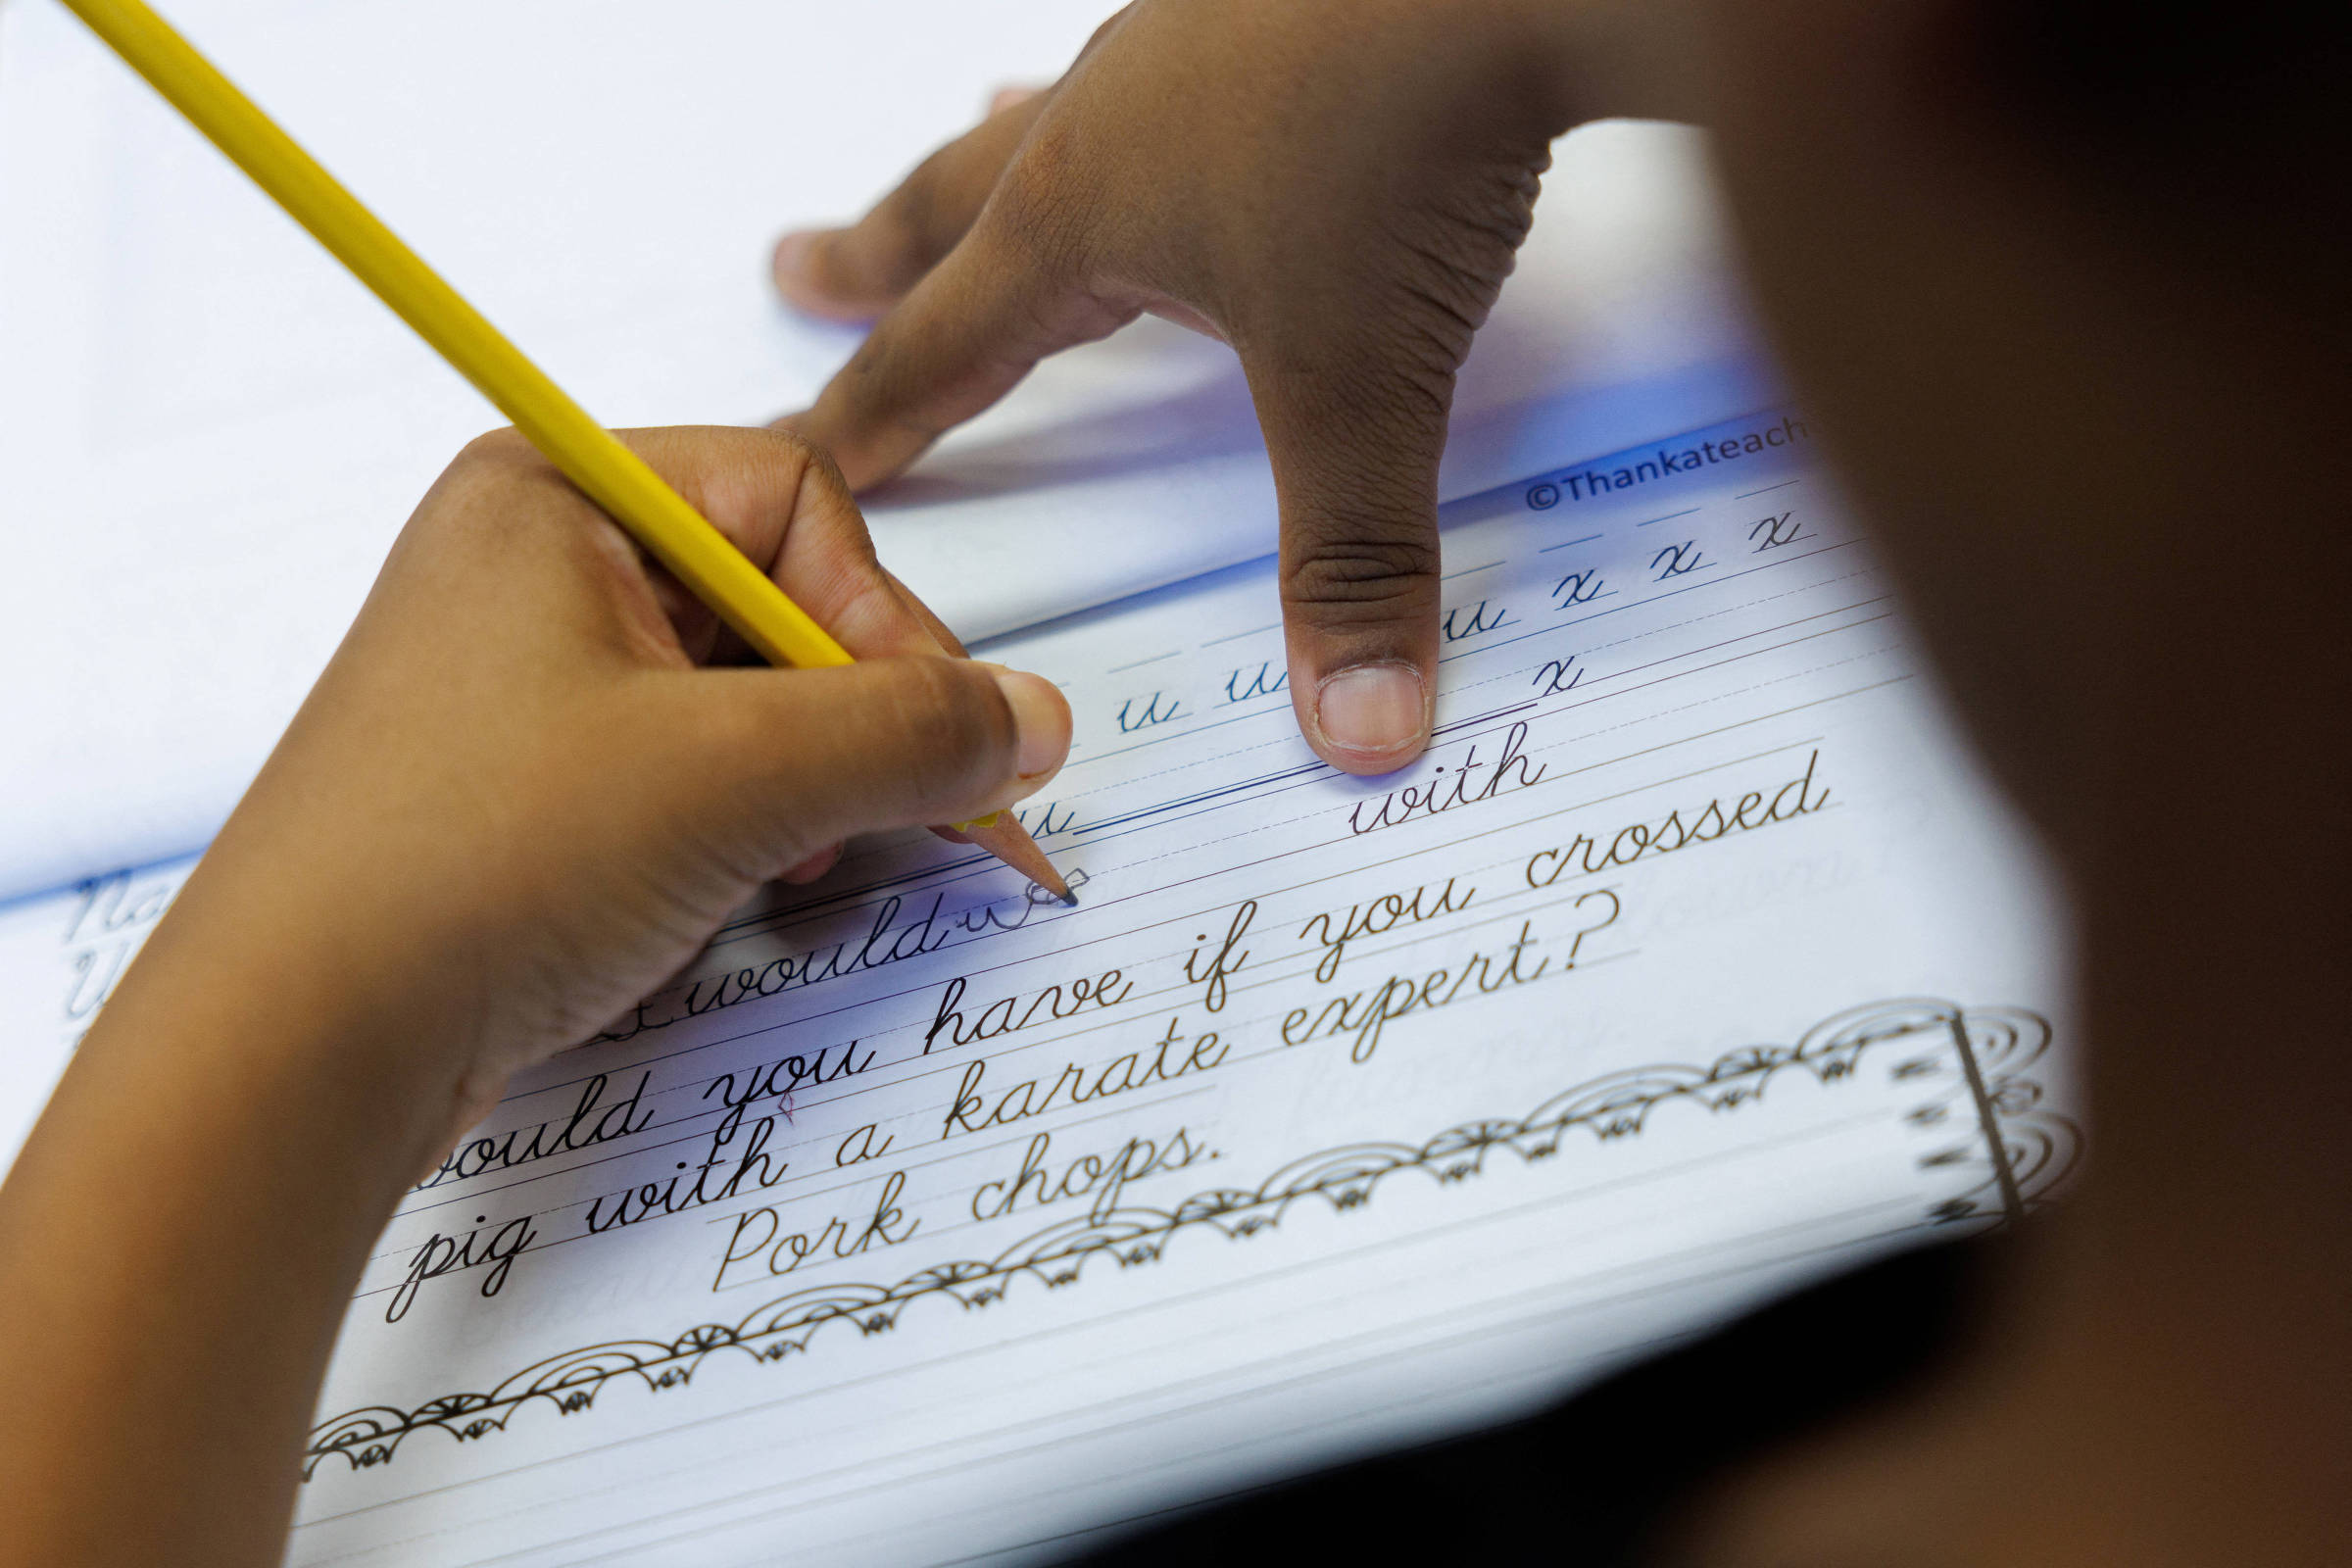 California again requires elementary school students to learn cursive